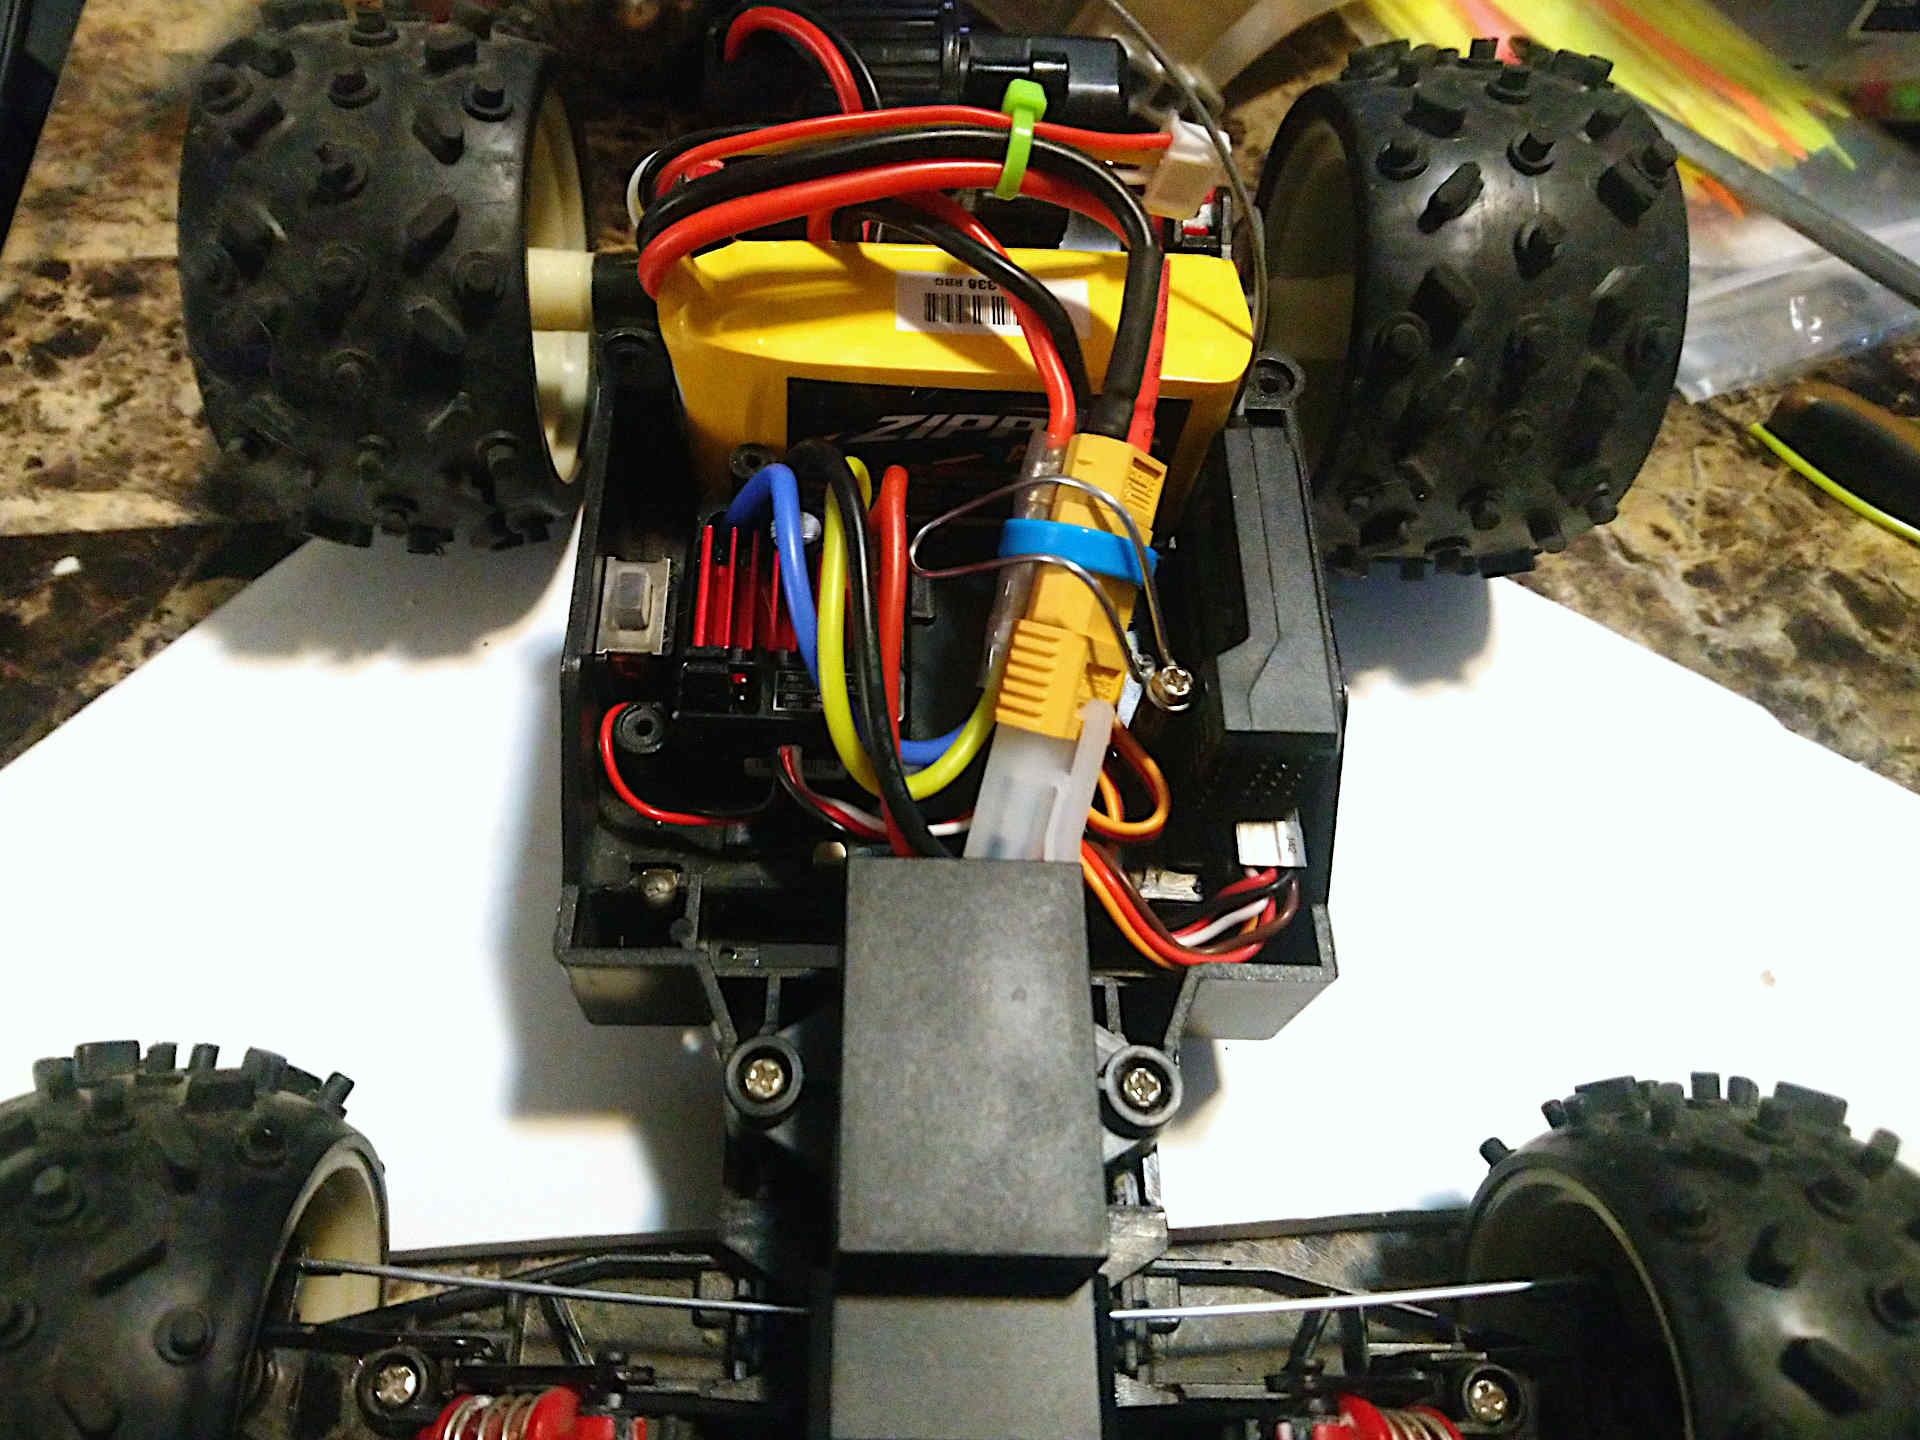 Hardware inside the car chassis with a retaining wire installed